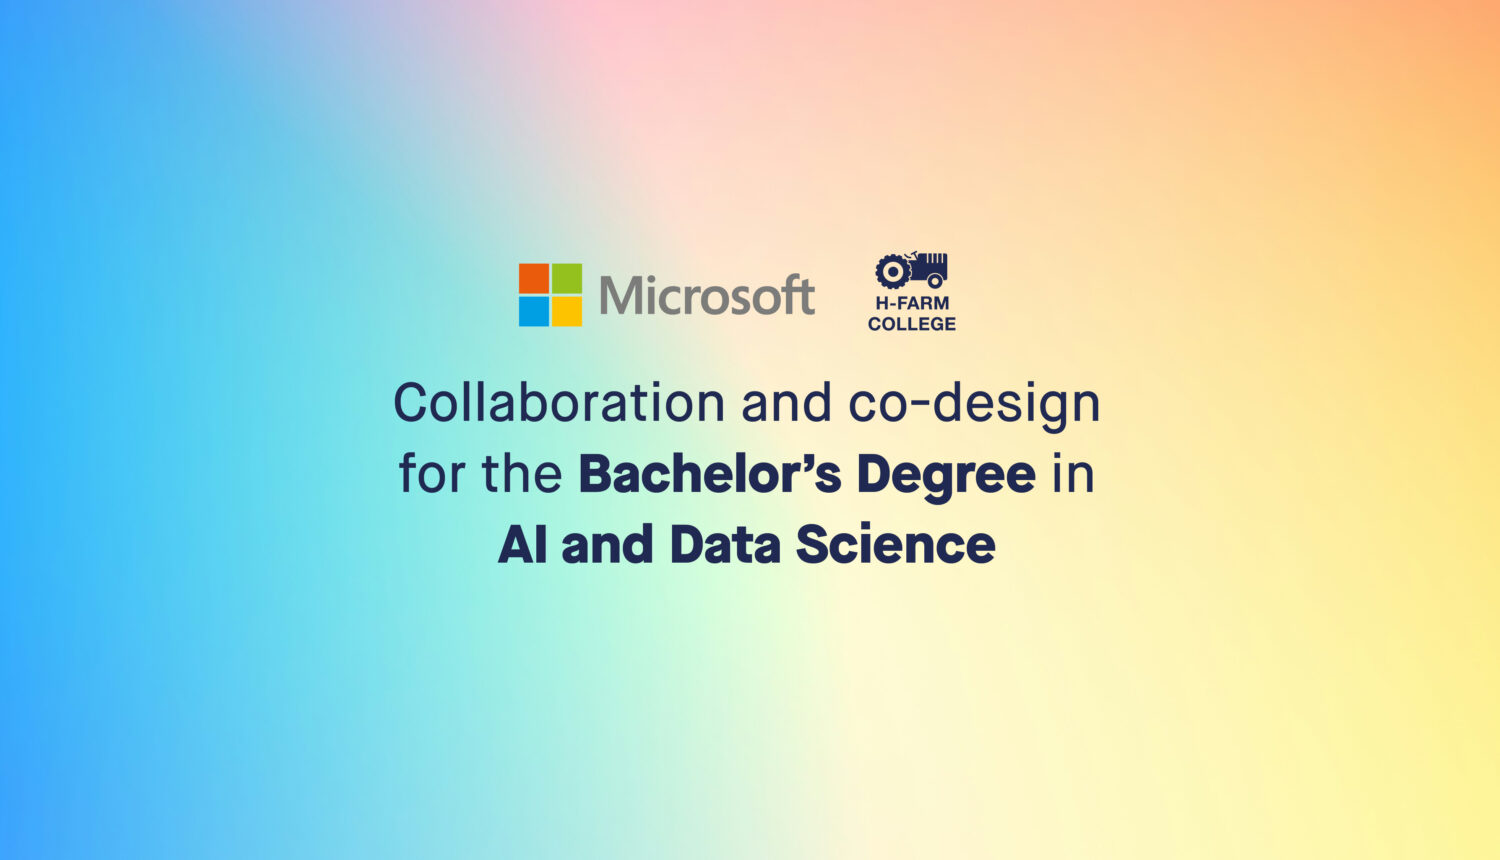 H-FARM College and Microsoft Italia: collaboration and co-design for the BSc in AI & Data Science